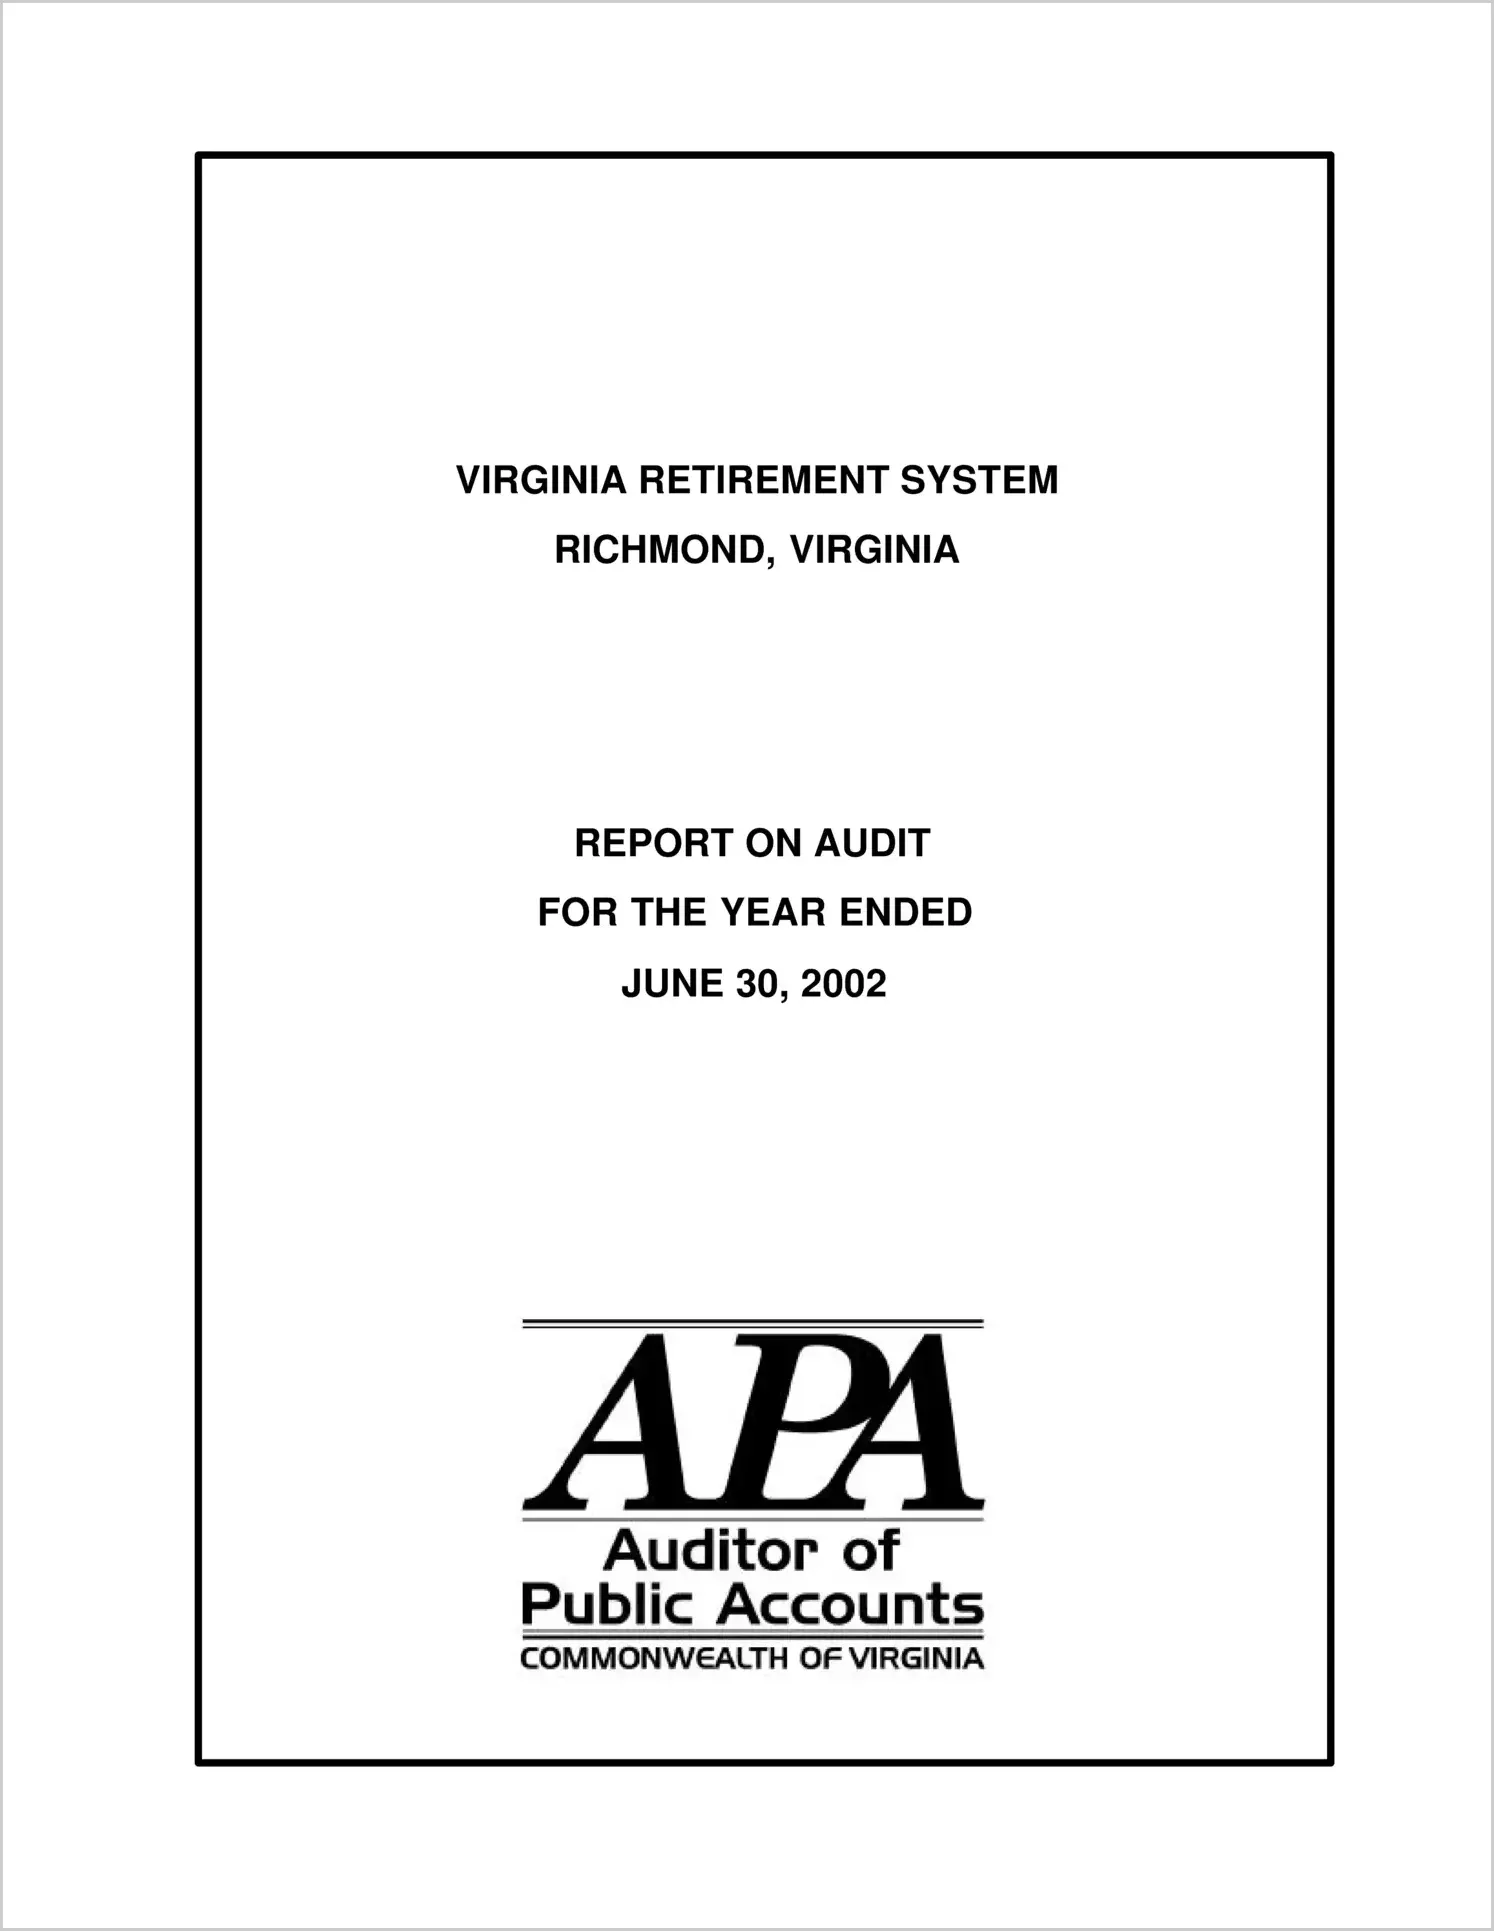 Virginia Retirement System for the year ended June 30, 2002